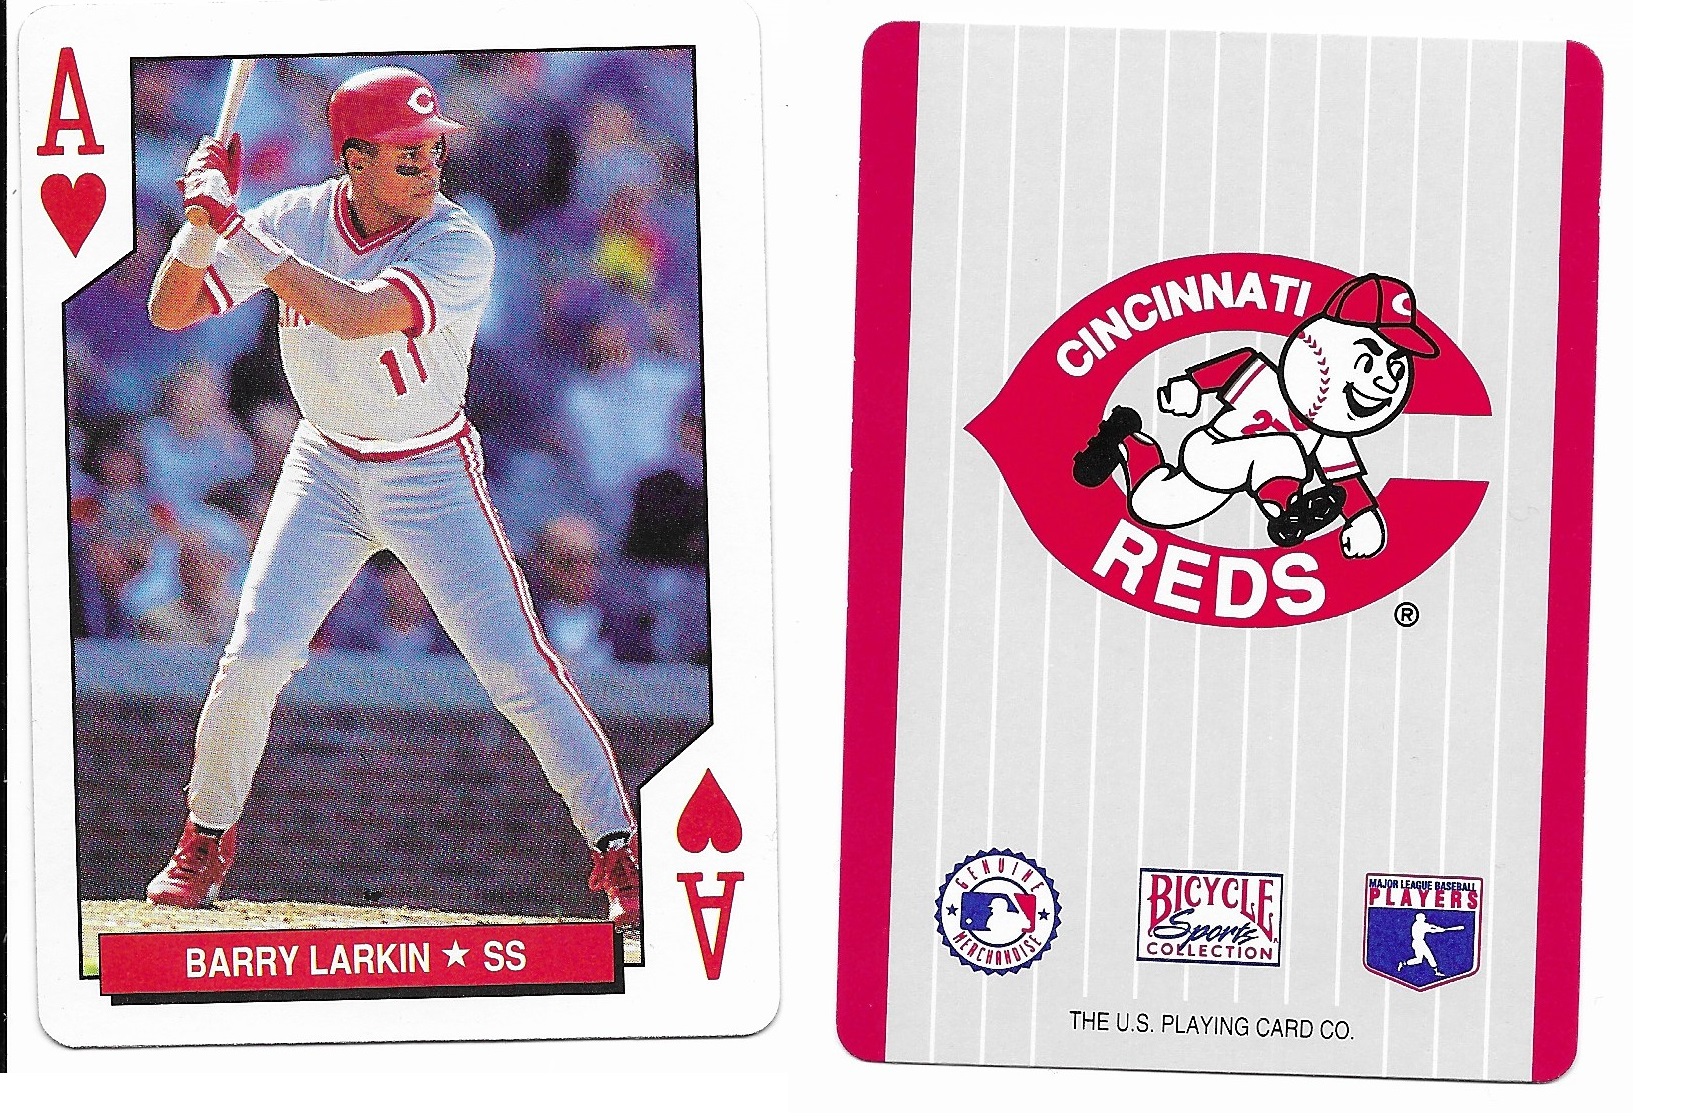 Barry Larkin Collection 903: 1993 Bicycle Reds - Ace of Hearts